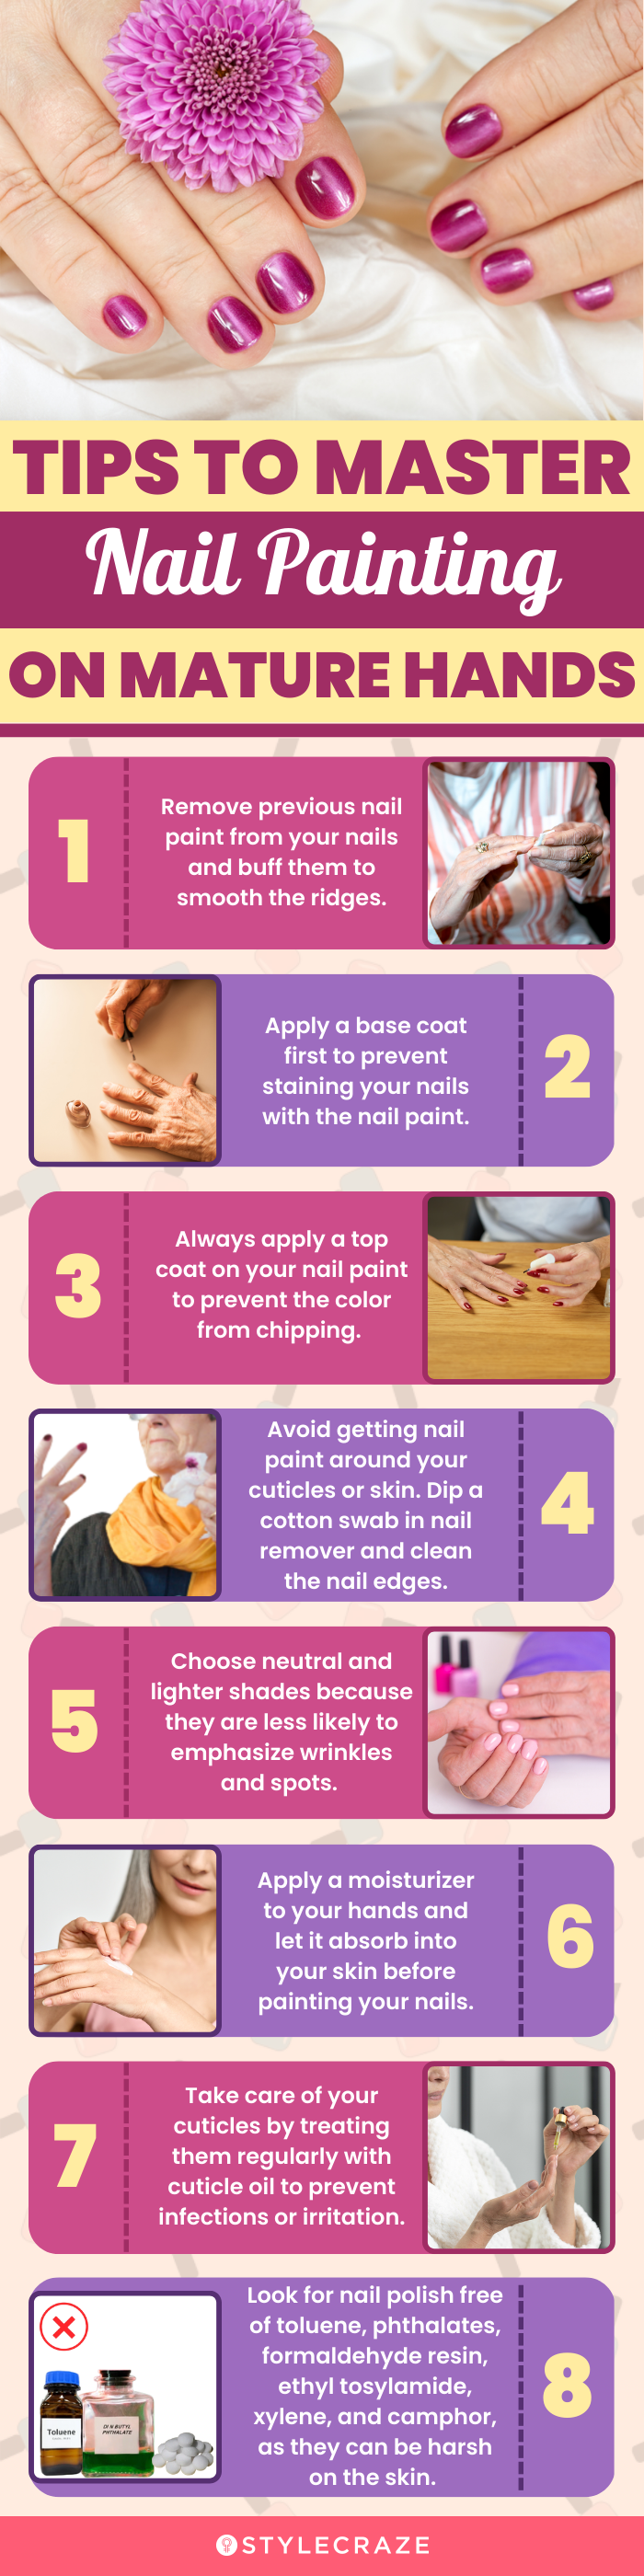 Tips To Master Nail Painting On Mature Hands (infographic)